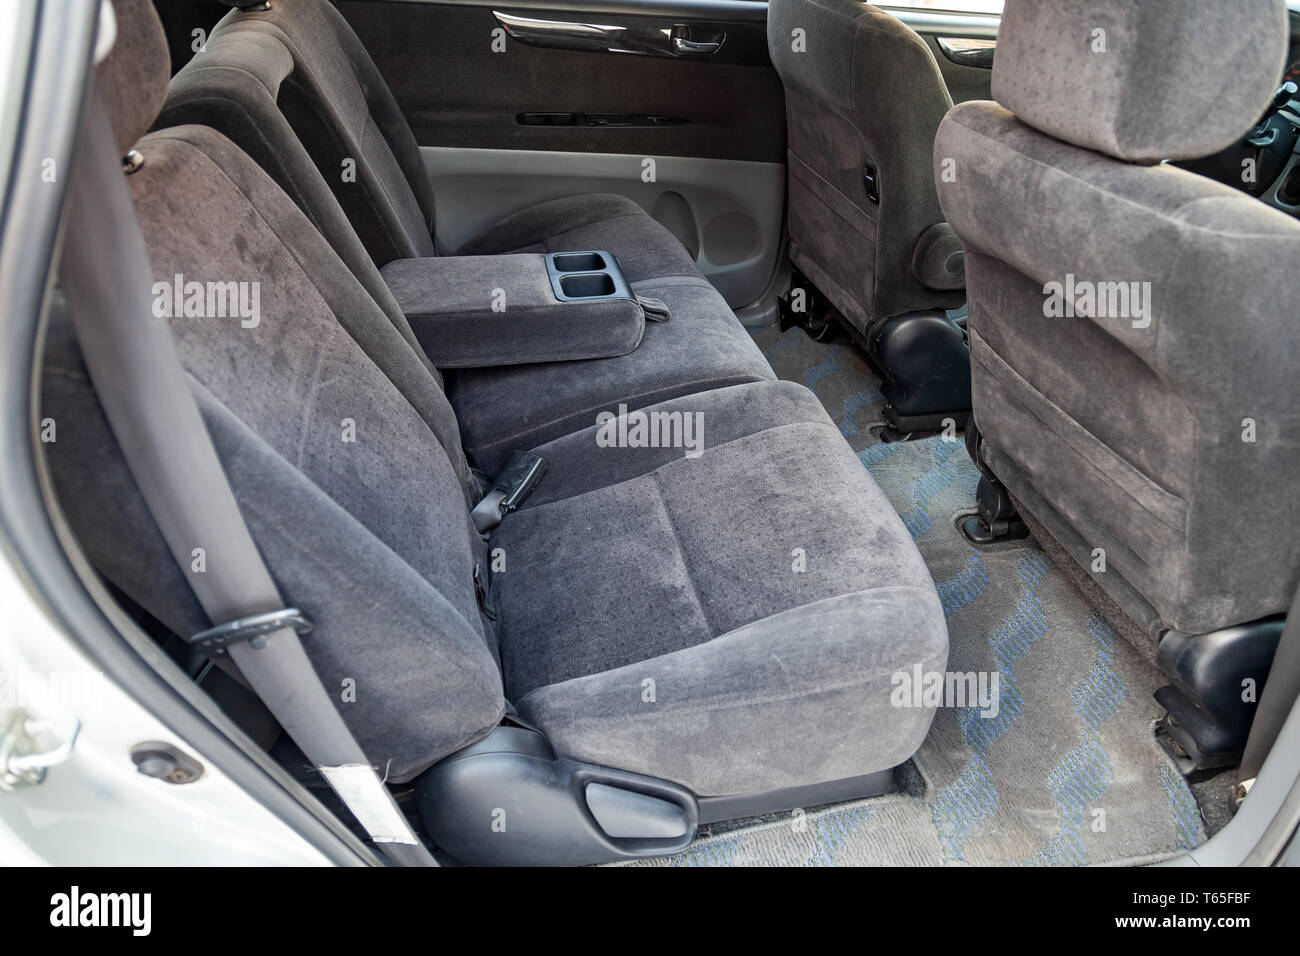 Close Up On Rear Seats With Velours Fabric Upholstery In The